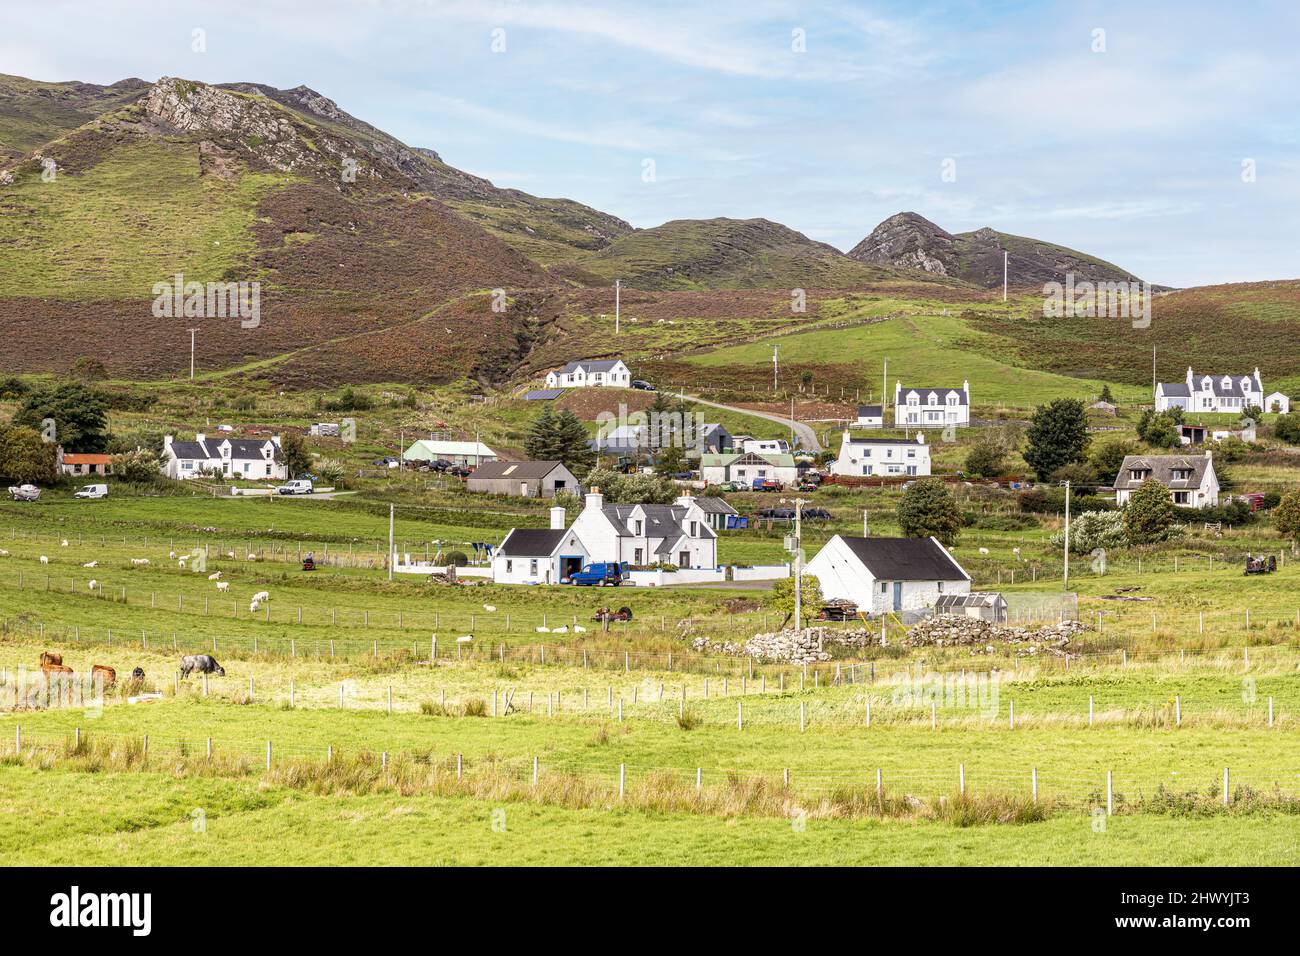 The village of Digg in the north of the Isle of Skye, Highland, Scotland UK. Stock Photo